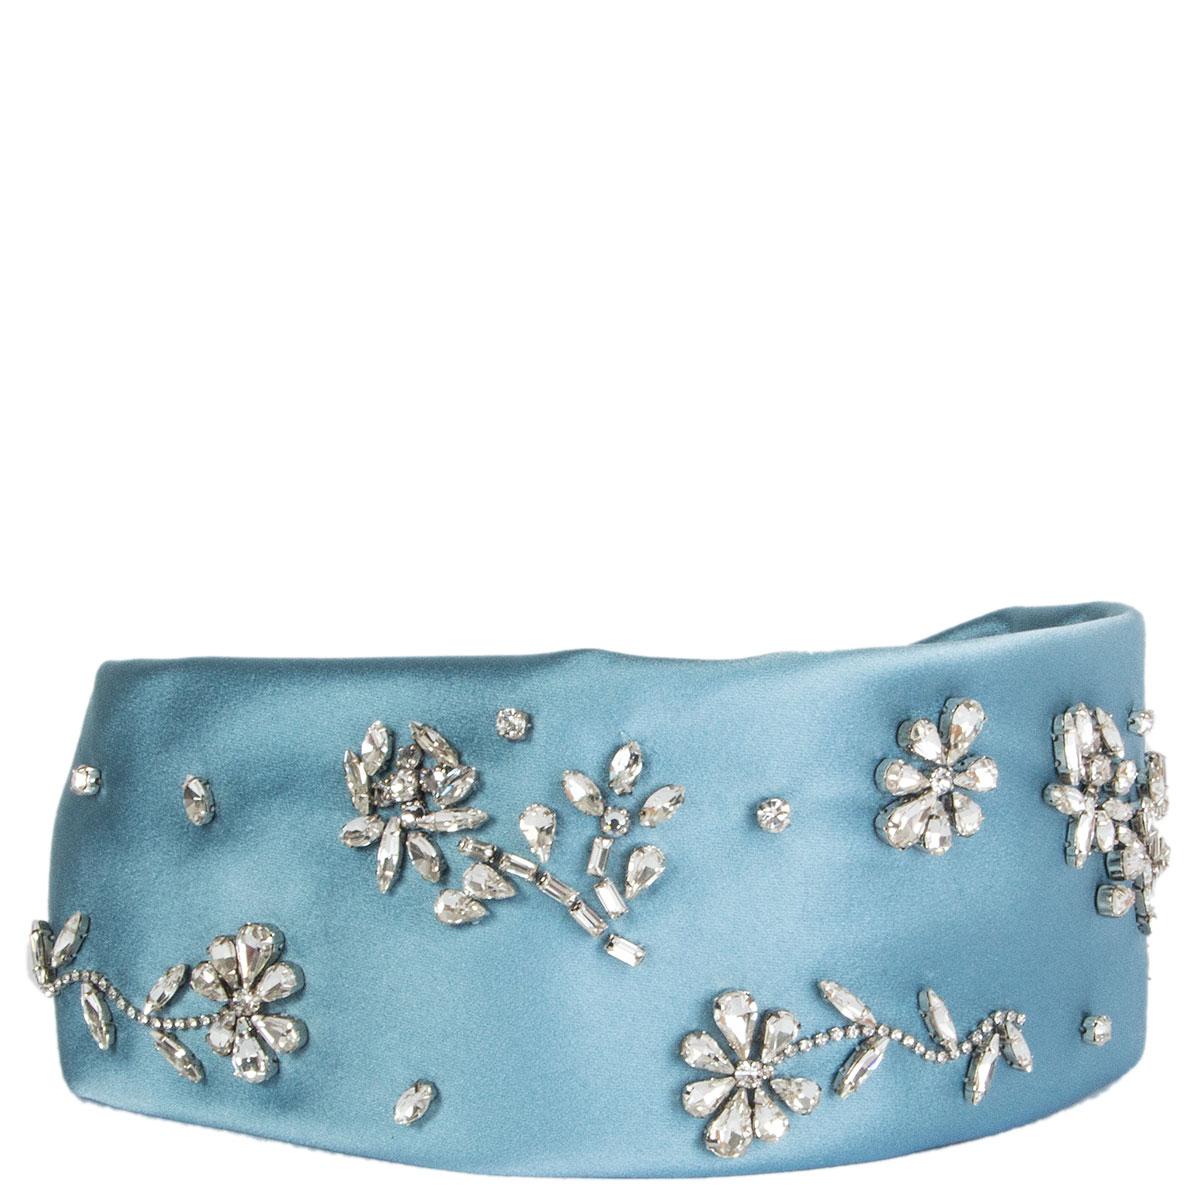 100% authentic Prada crystal embellished headband in light blue silk satin (100%) featuring a curved structure and a stretch fit. Brand new. Comes with dust bag. 

All our listings include only the listed item unless otherwise specified in the